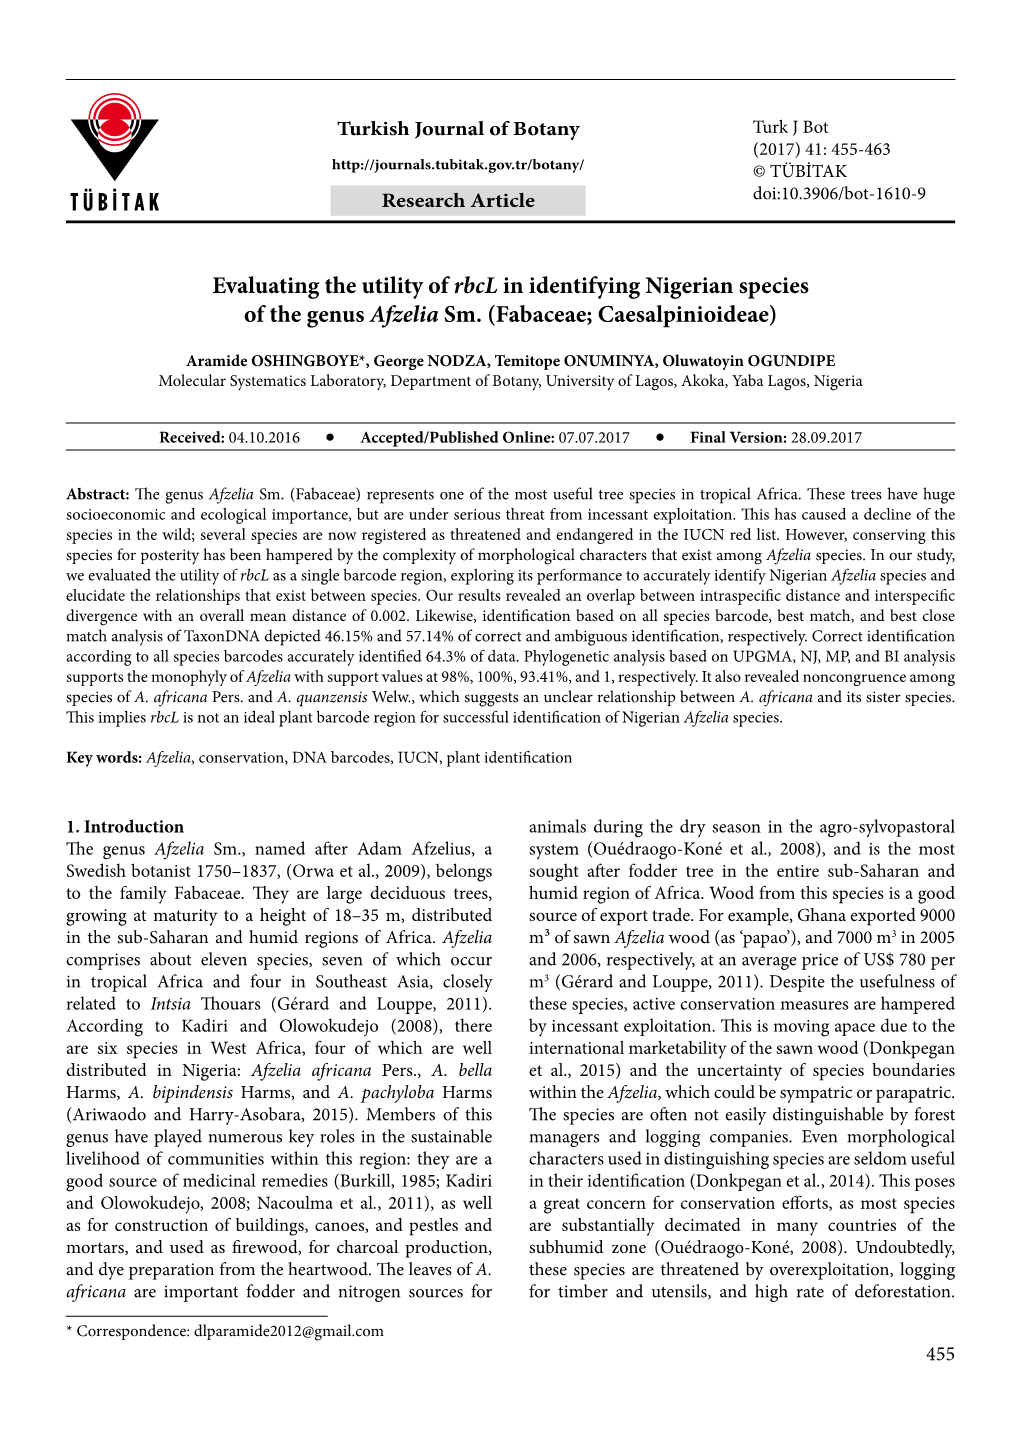 Evaluating the Utility of Rbcl in Identifying Nigerian Species of the Genus Afzelia Sm